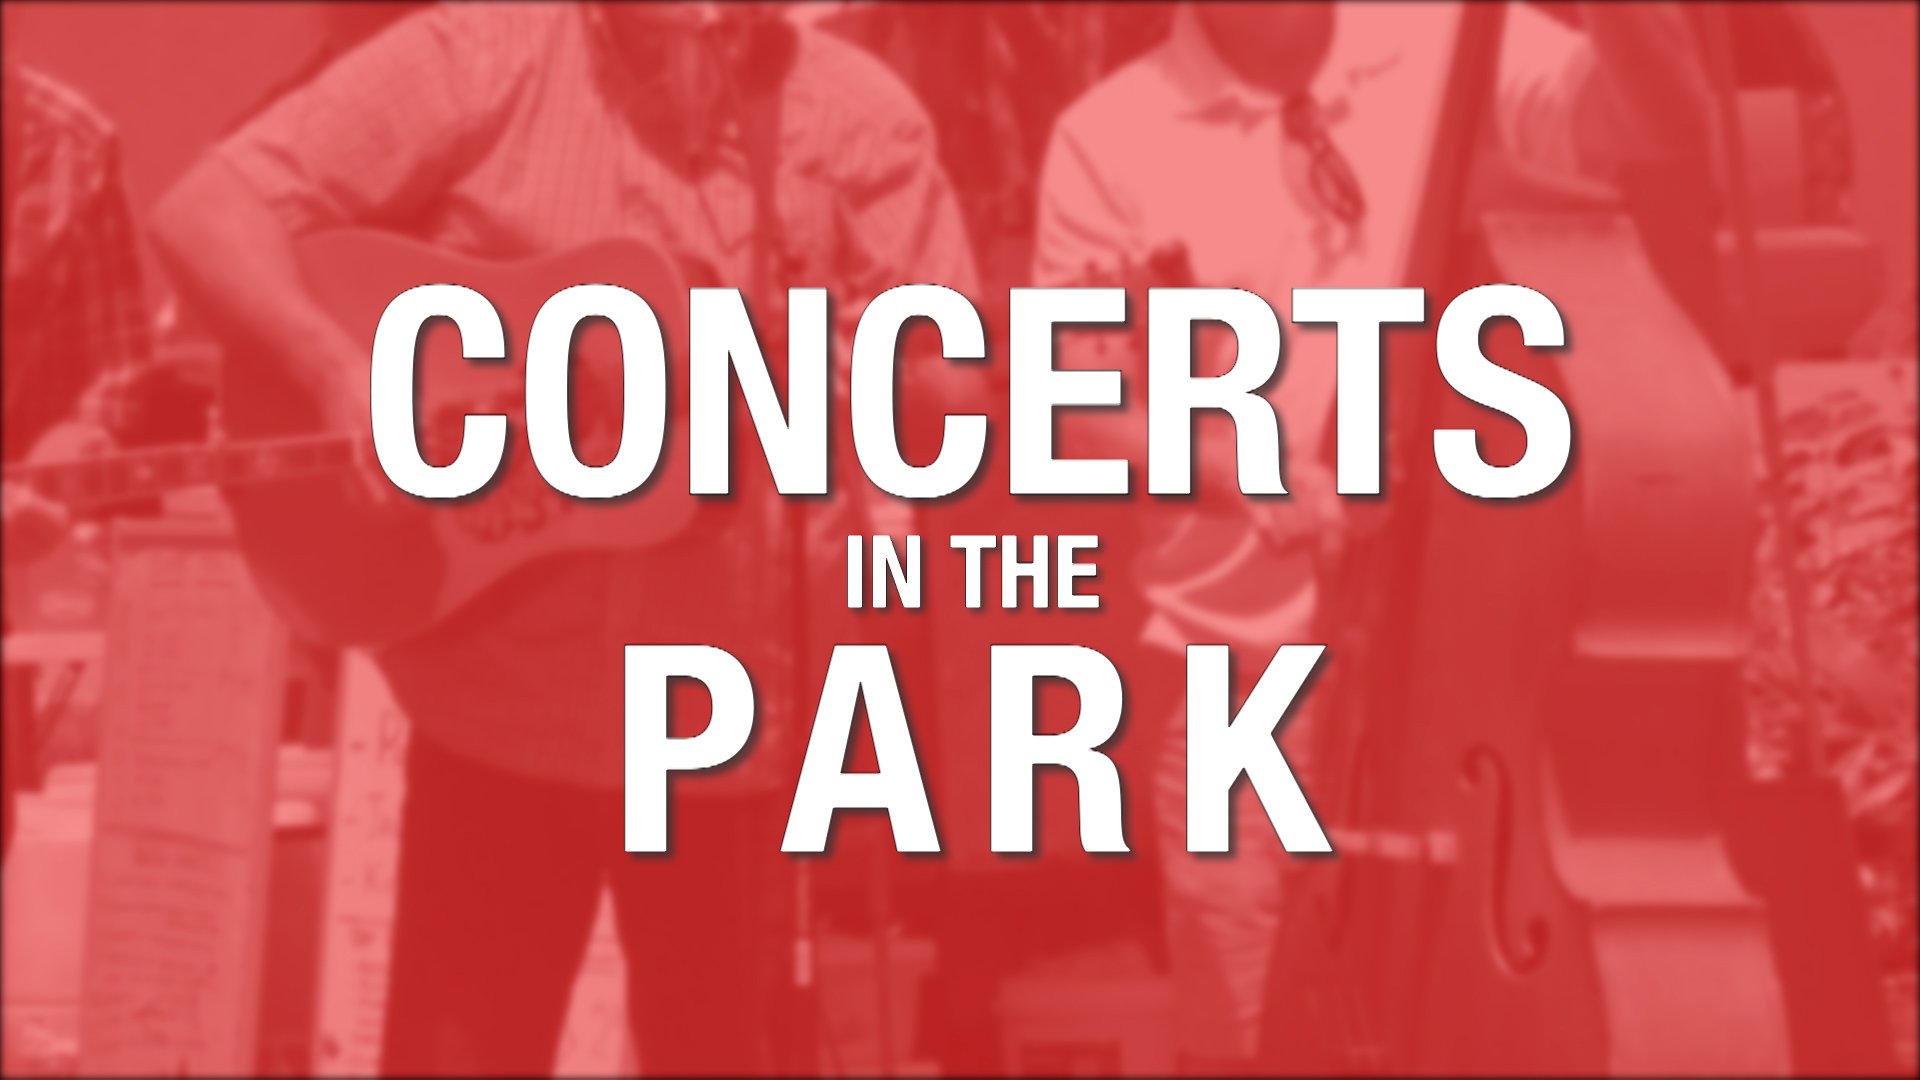 Lineup and schedule released for Concerts in the Park WNKY News 40